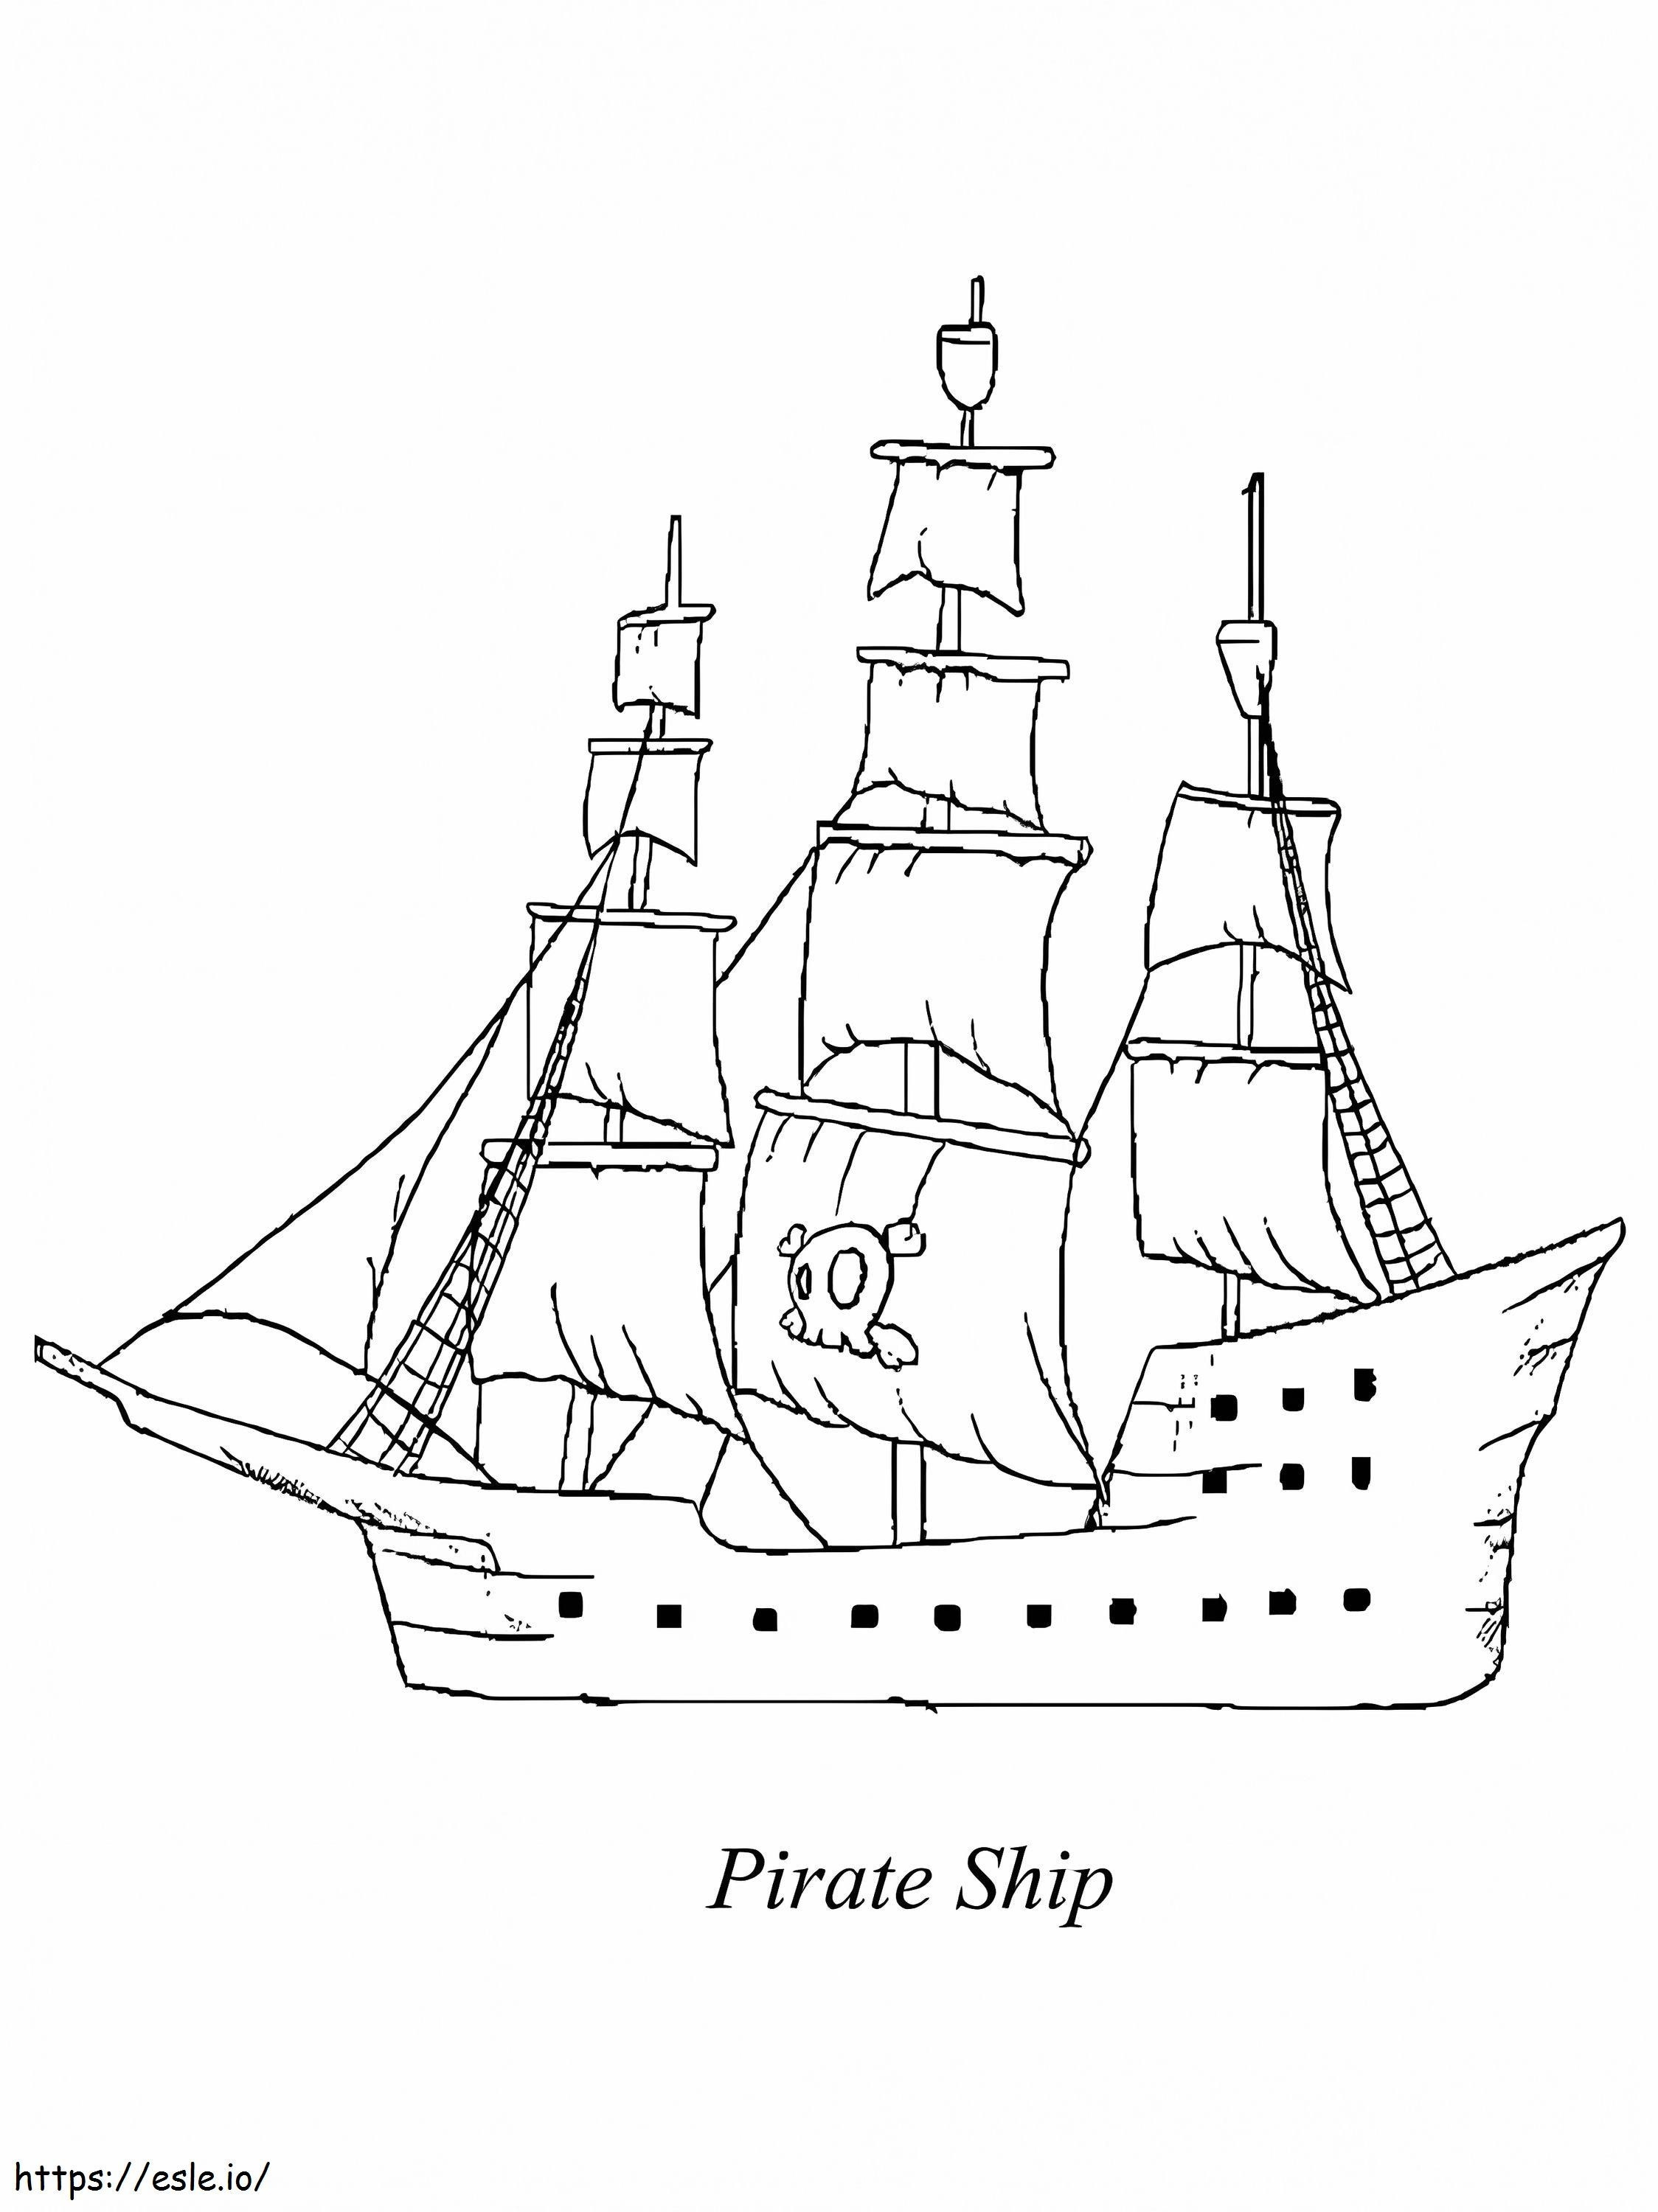 A Pirate Ship coloring page